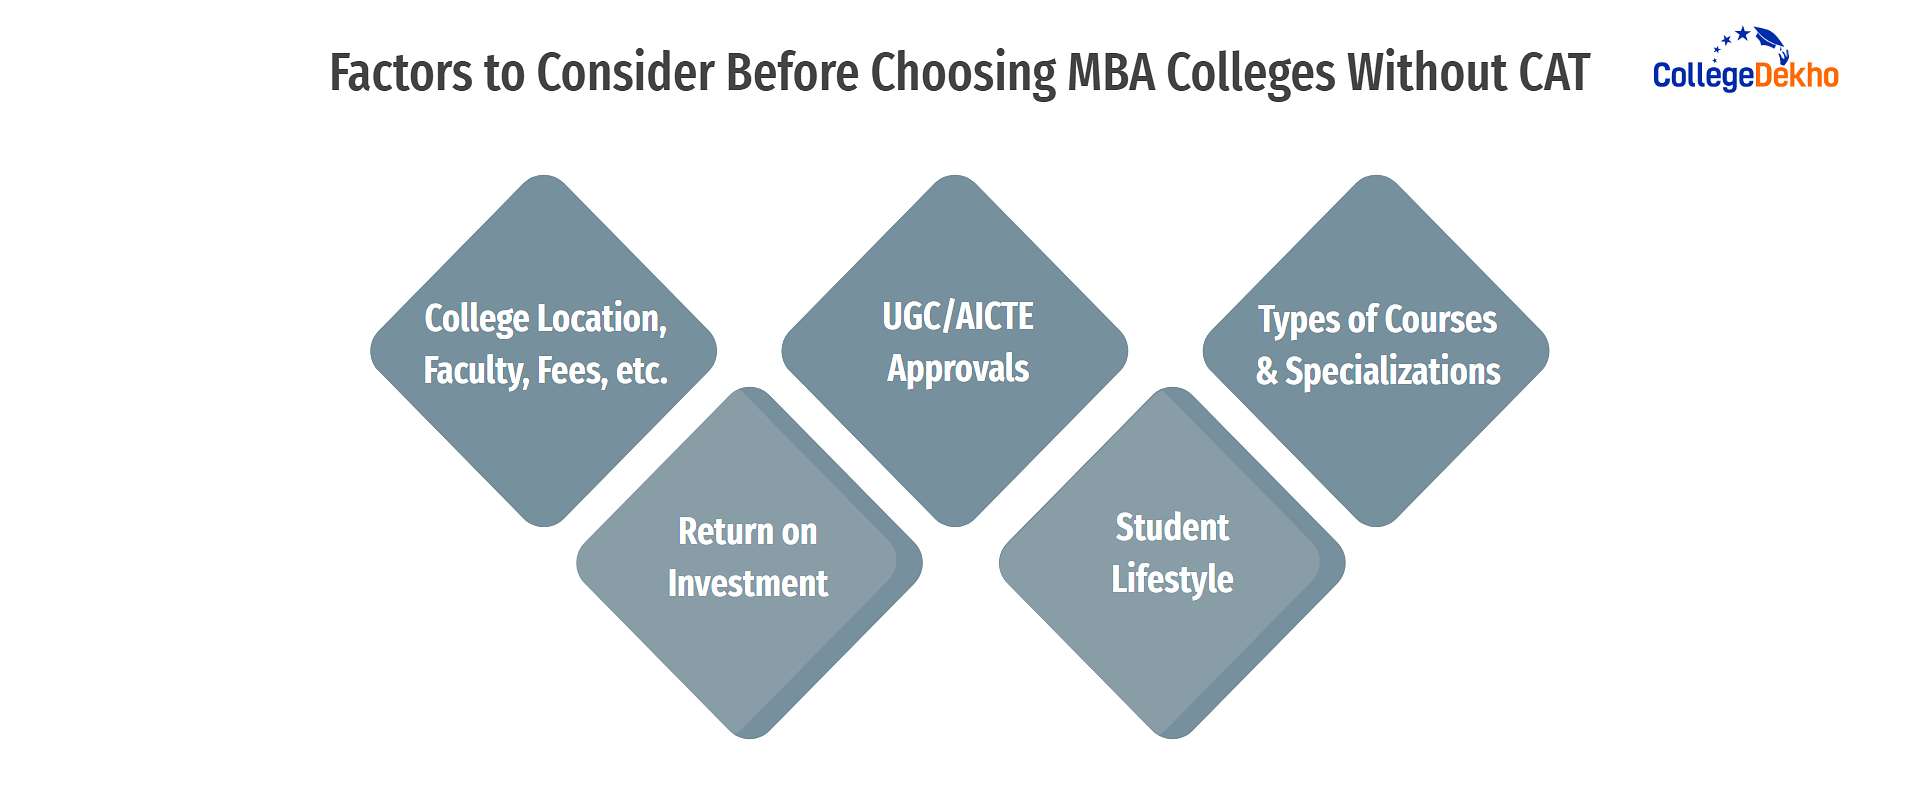 Factors to Consider Before Choosing MBA Colleges Without CAT